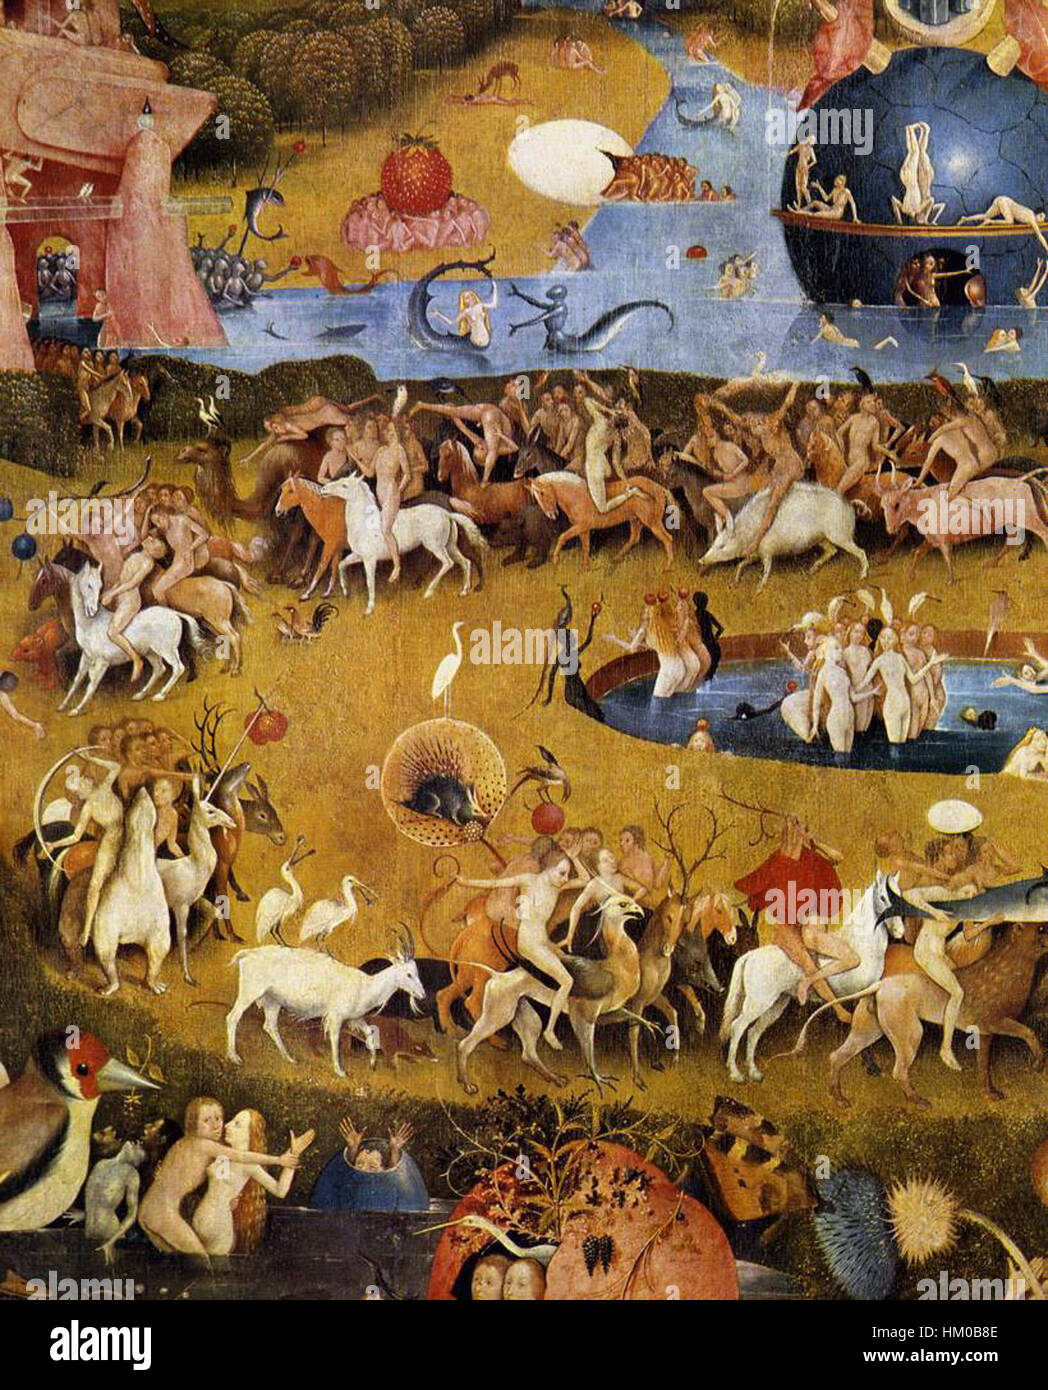 Hieronymus Bosch - Triptych of Garden of Earthly Delights (detail) - WGA2510 Stock Photo